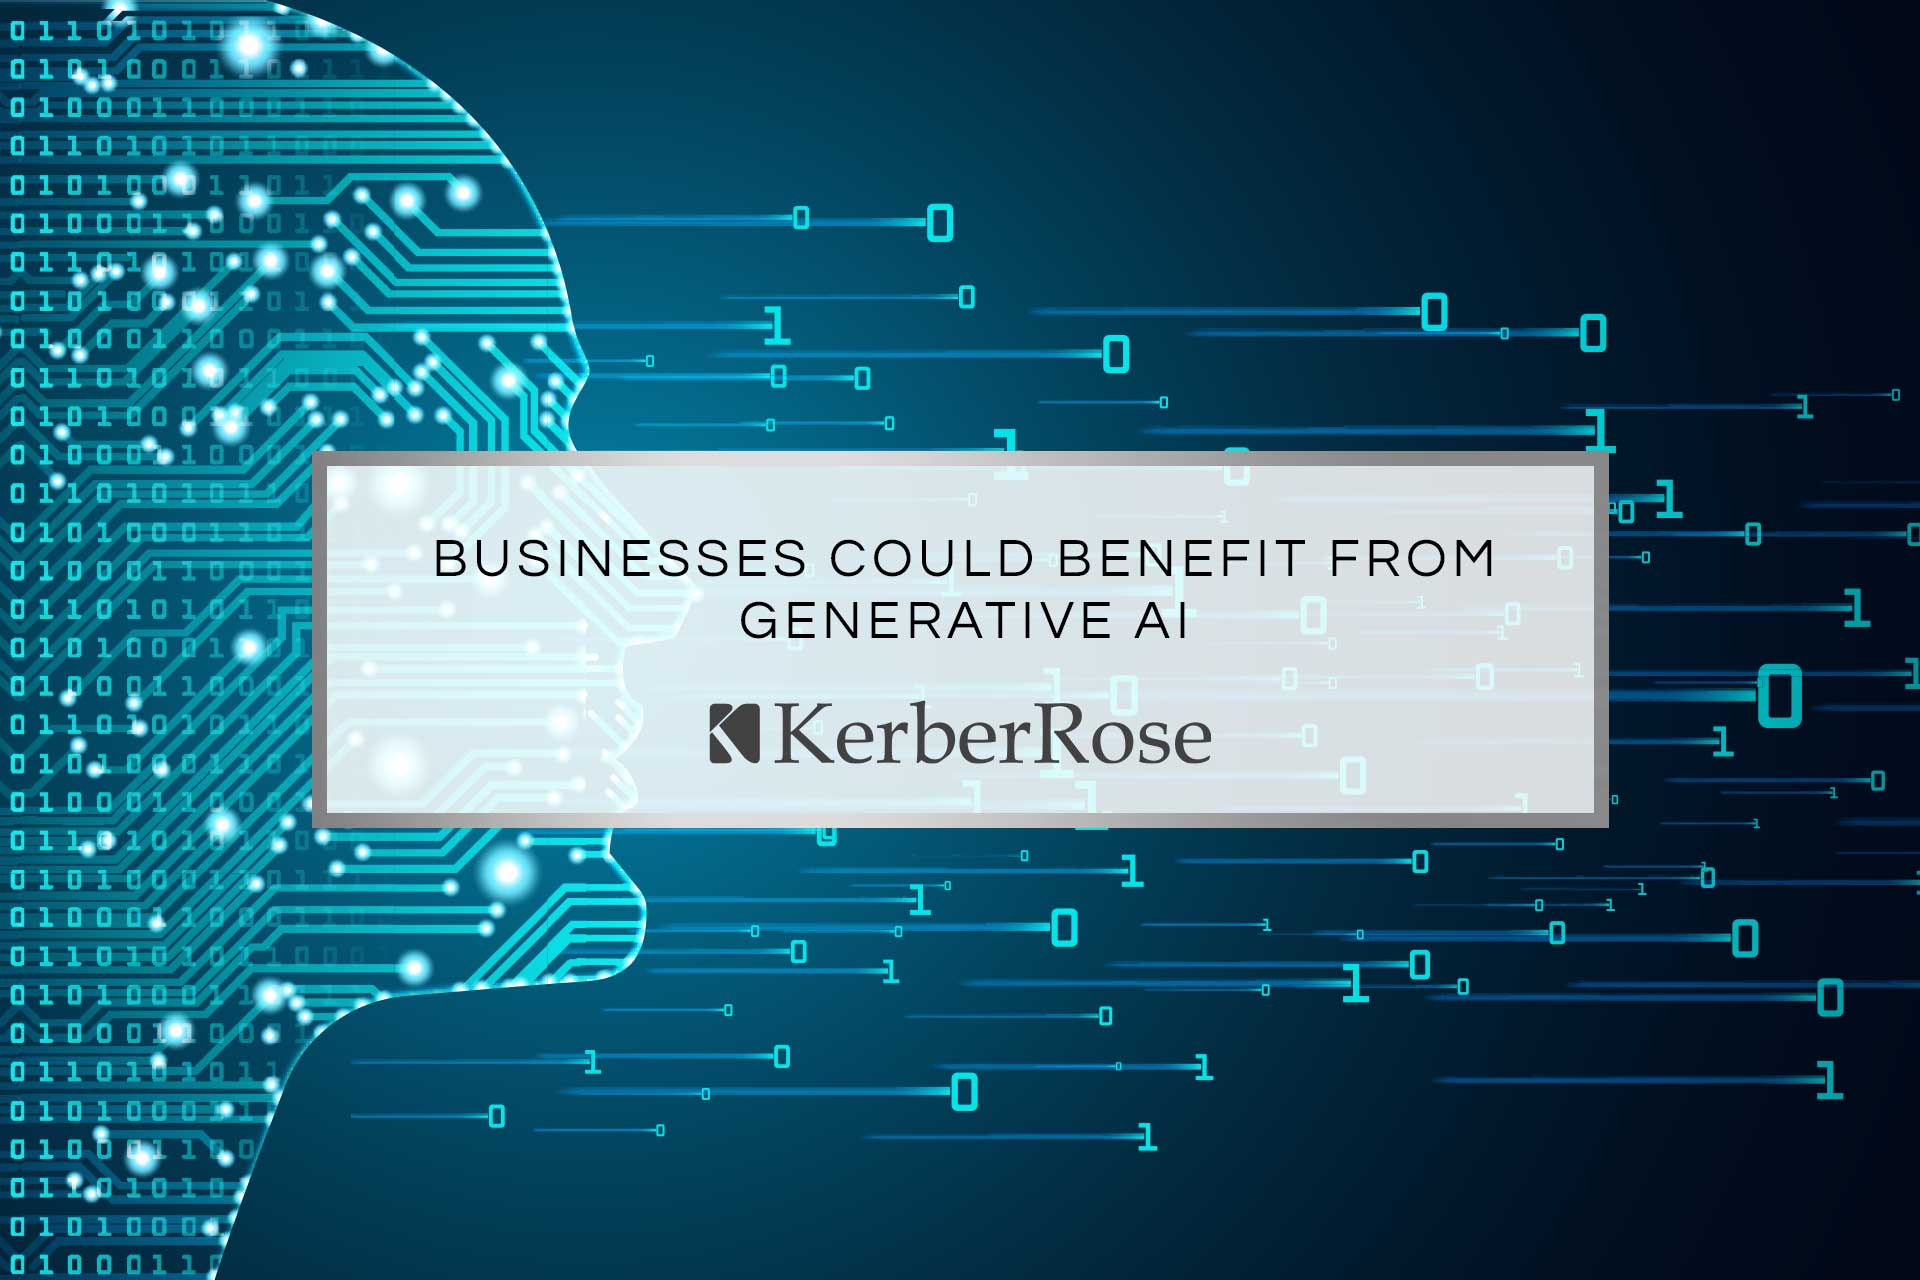 Businesses Could Benefit from Generative AI